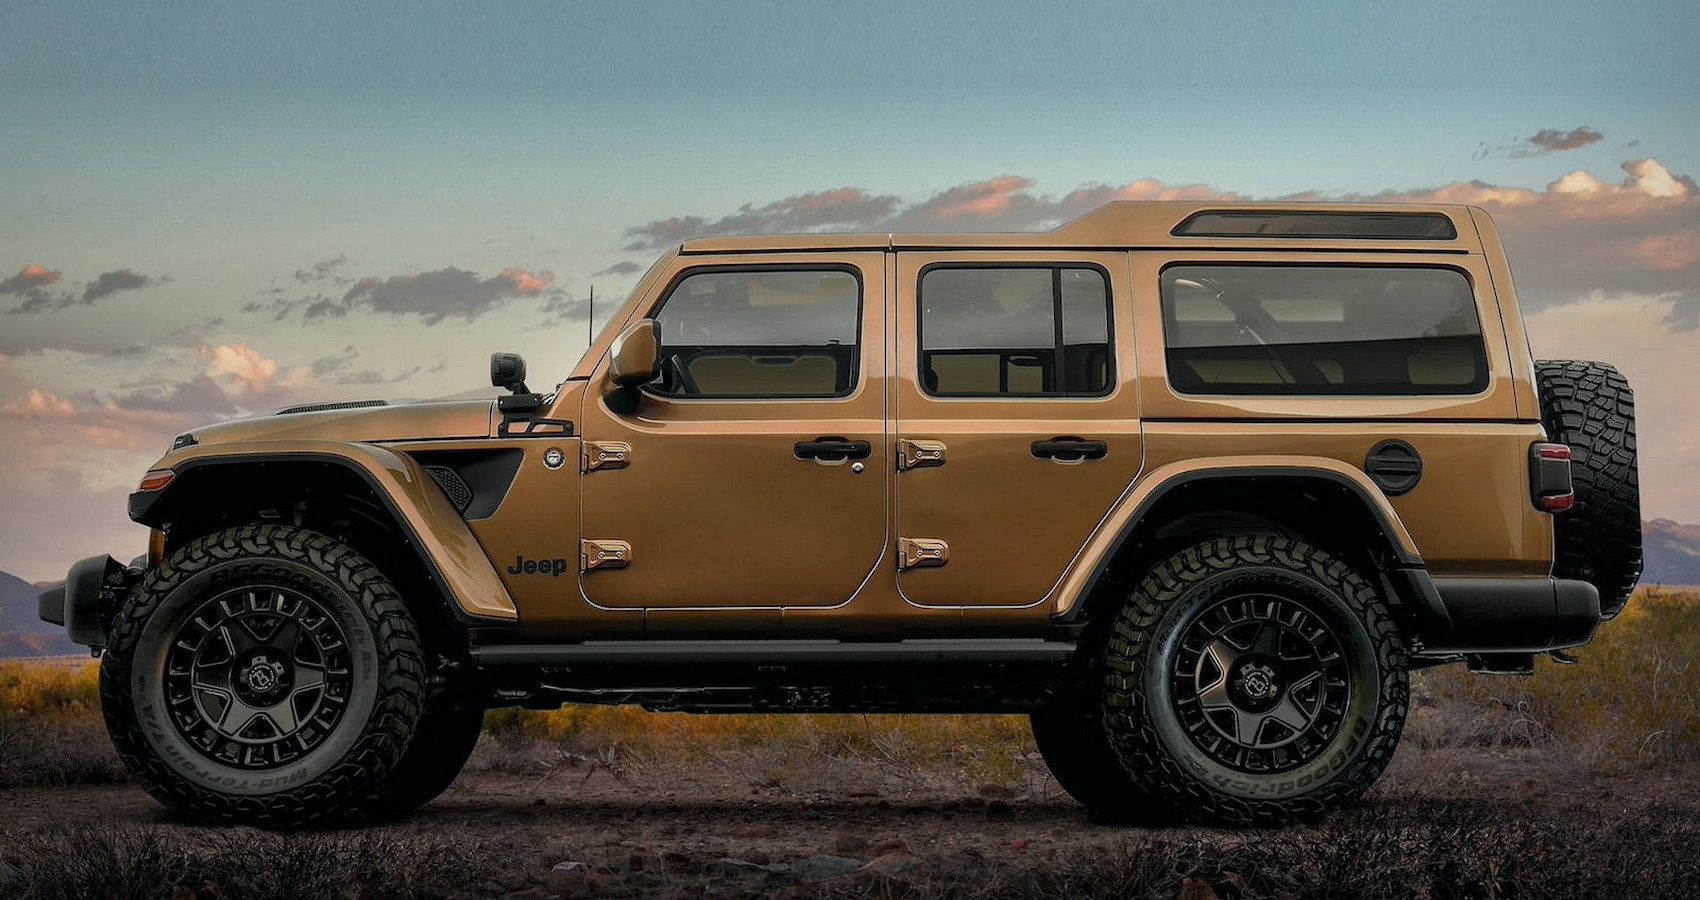 The Jeep Wrangler Overlook Concept Is The Three-Row SUV We Desperately Crave